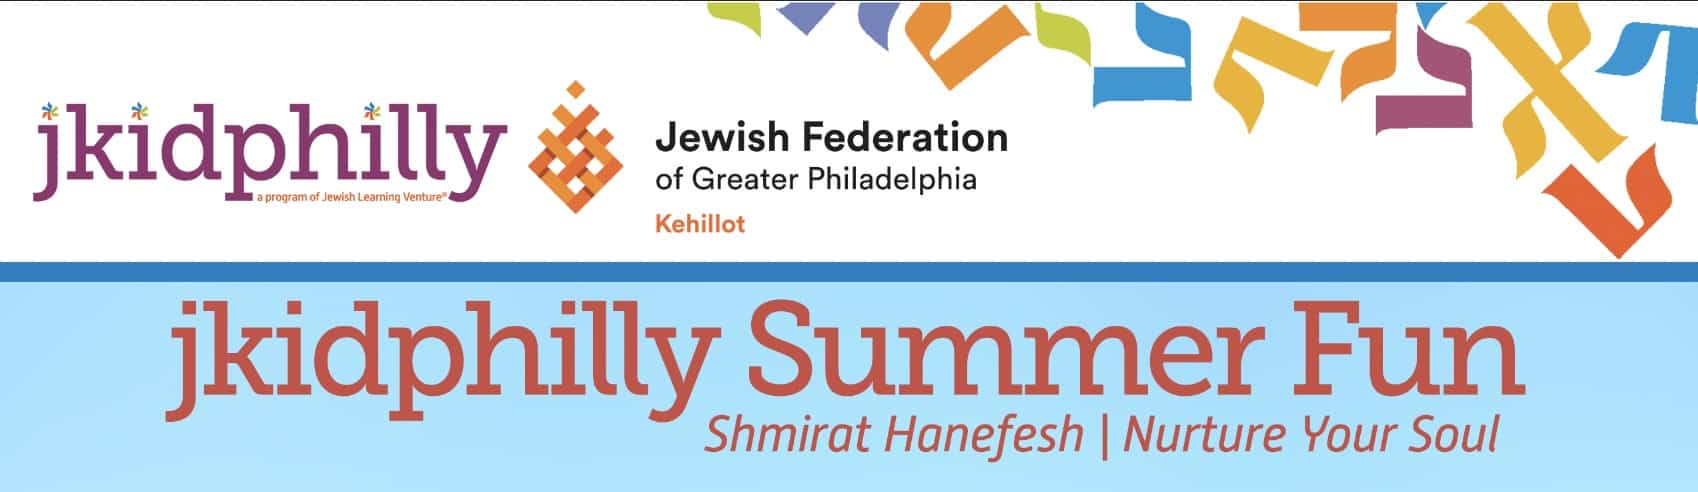 Website banner with logos for j kid philly and jewish federation of greater philadelphia kehillot. title underneath says, j kid philly summer fun, shmirat hanefesh, nurture your soul.